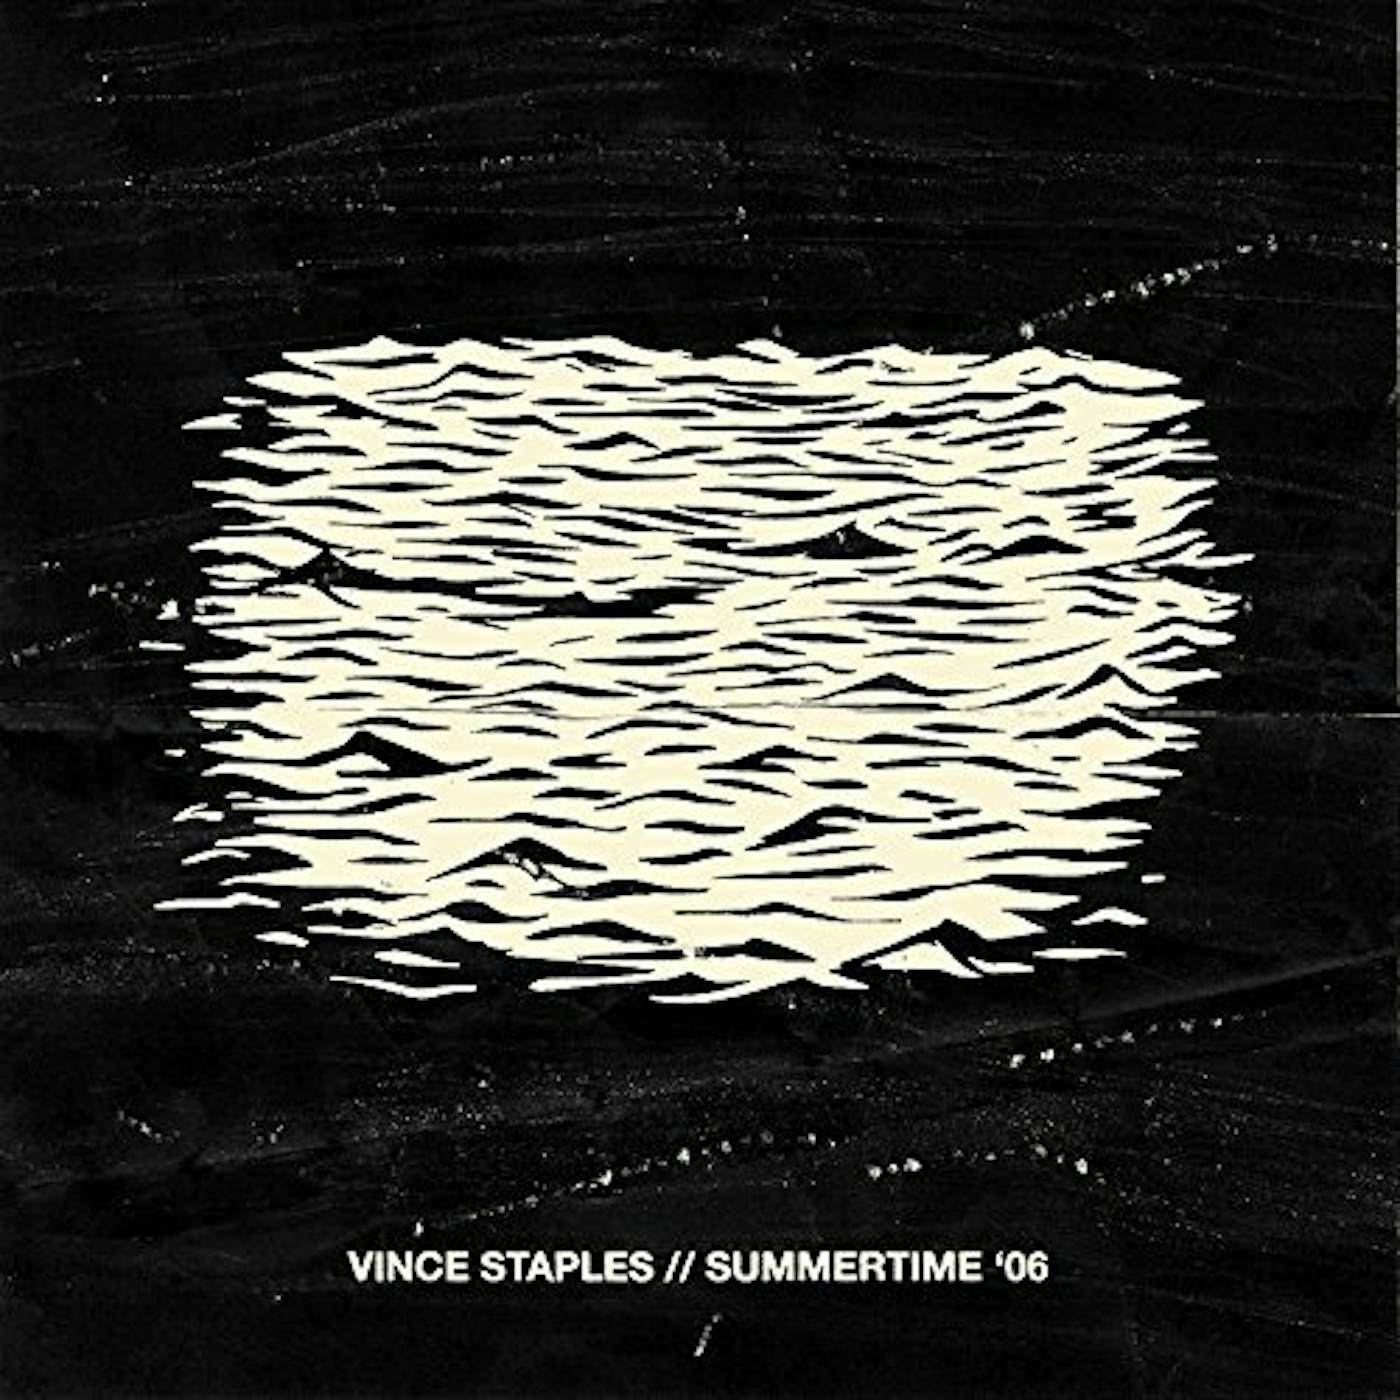 Vince Staples SUMMERTIME 06 (SPECIAL EDITION) Vinyl Record